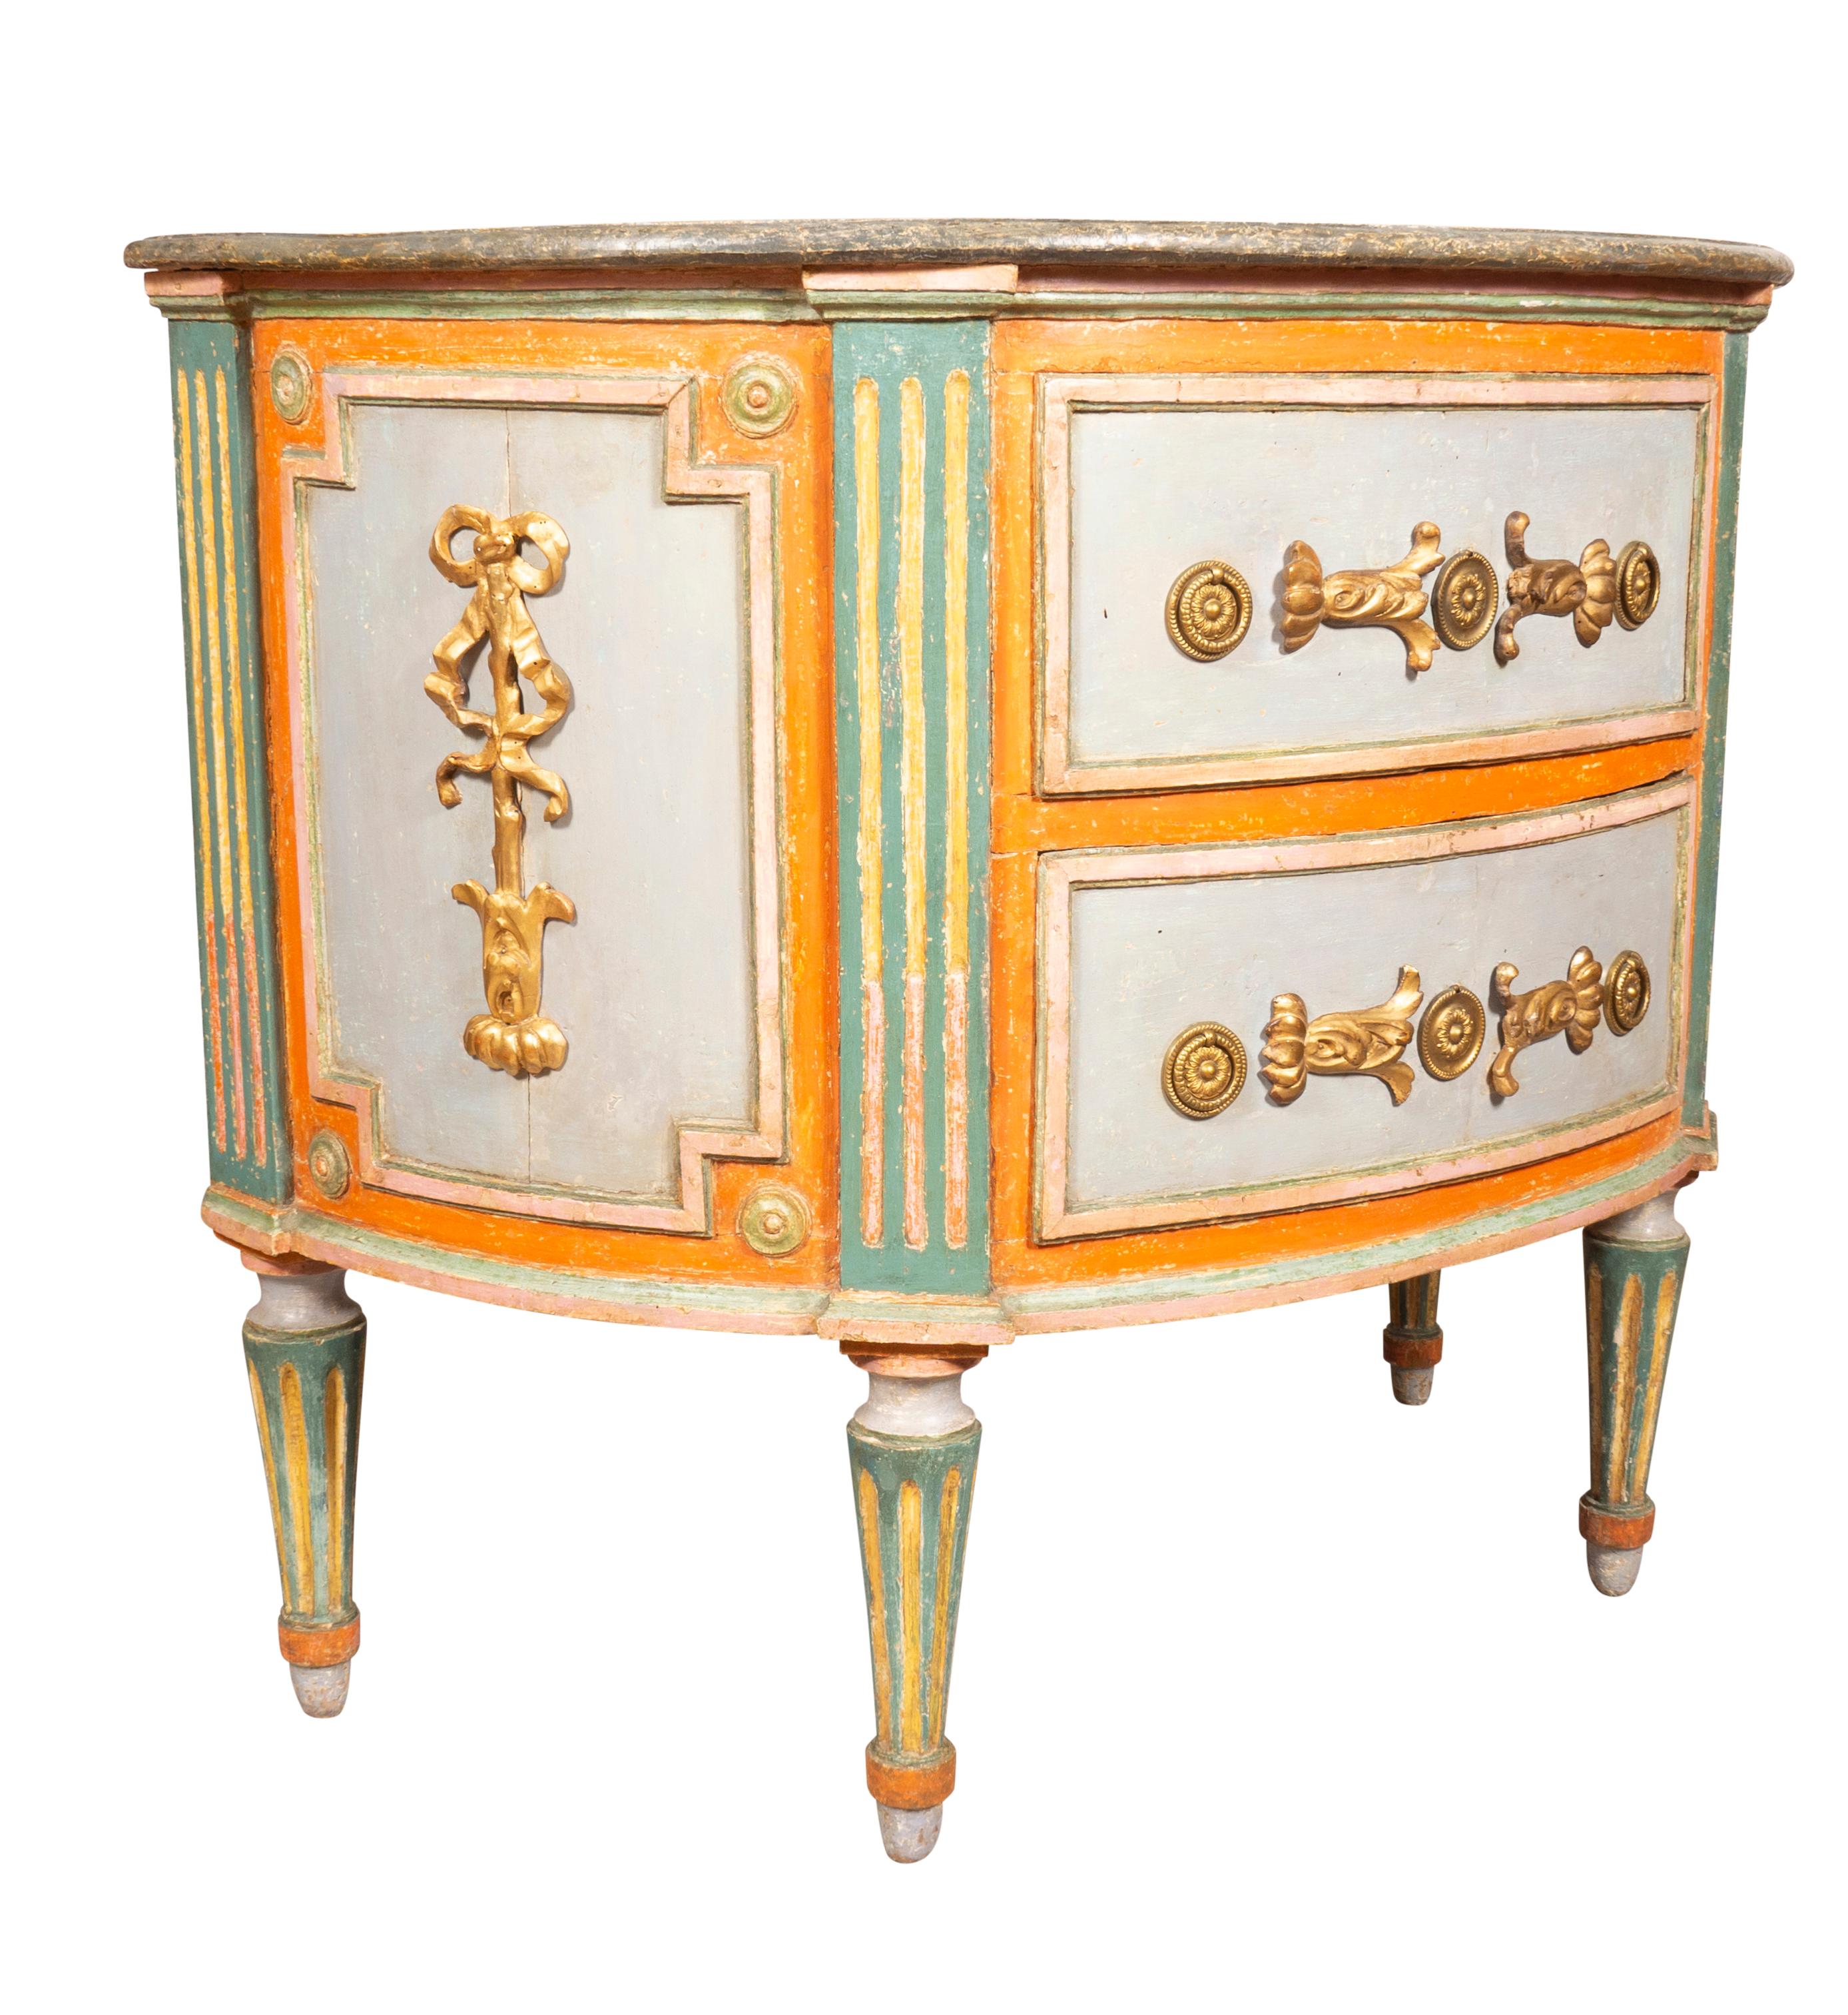 Early 19th Century Italian Neoclassic Painted Commode For Sale